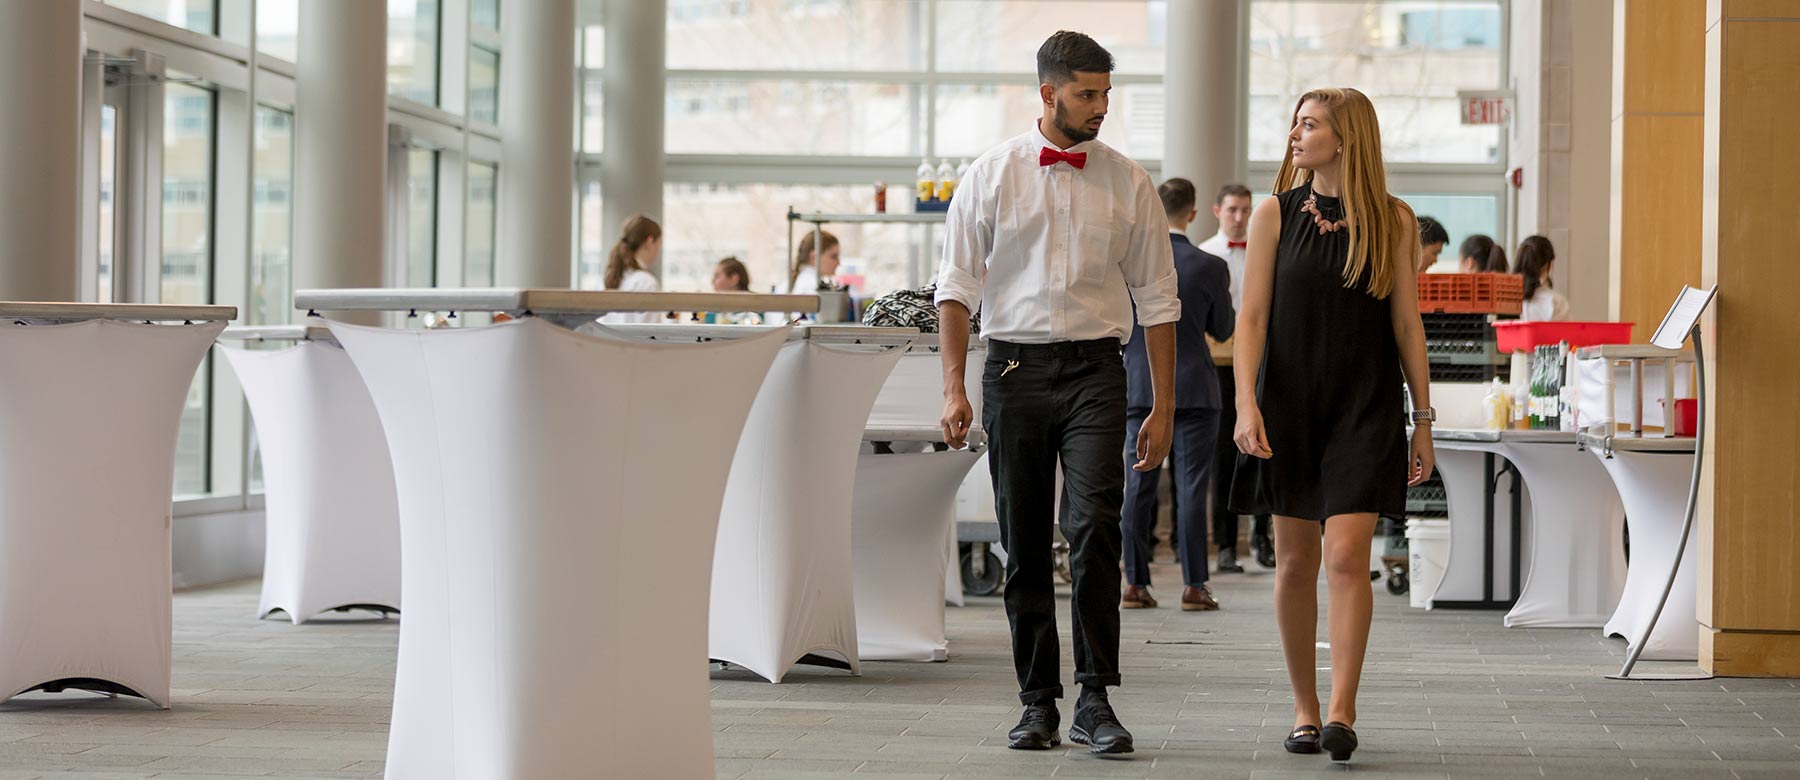 Two students walking in business attire